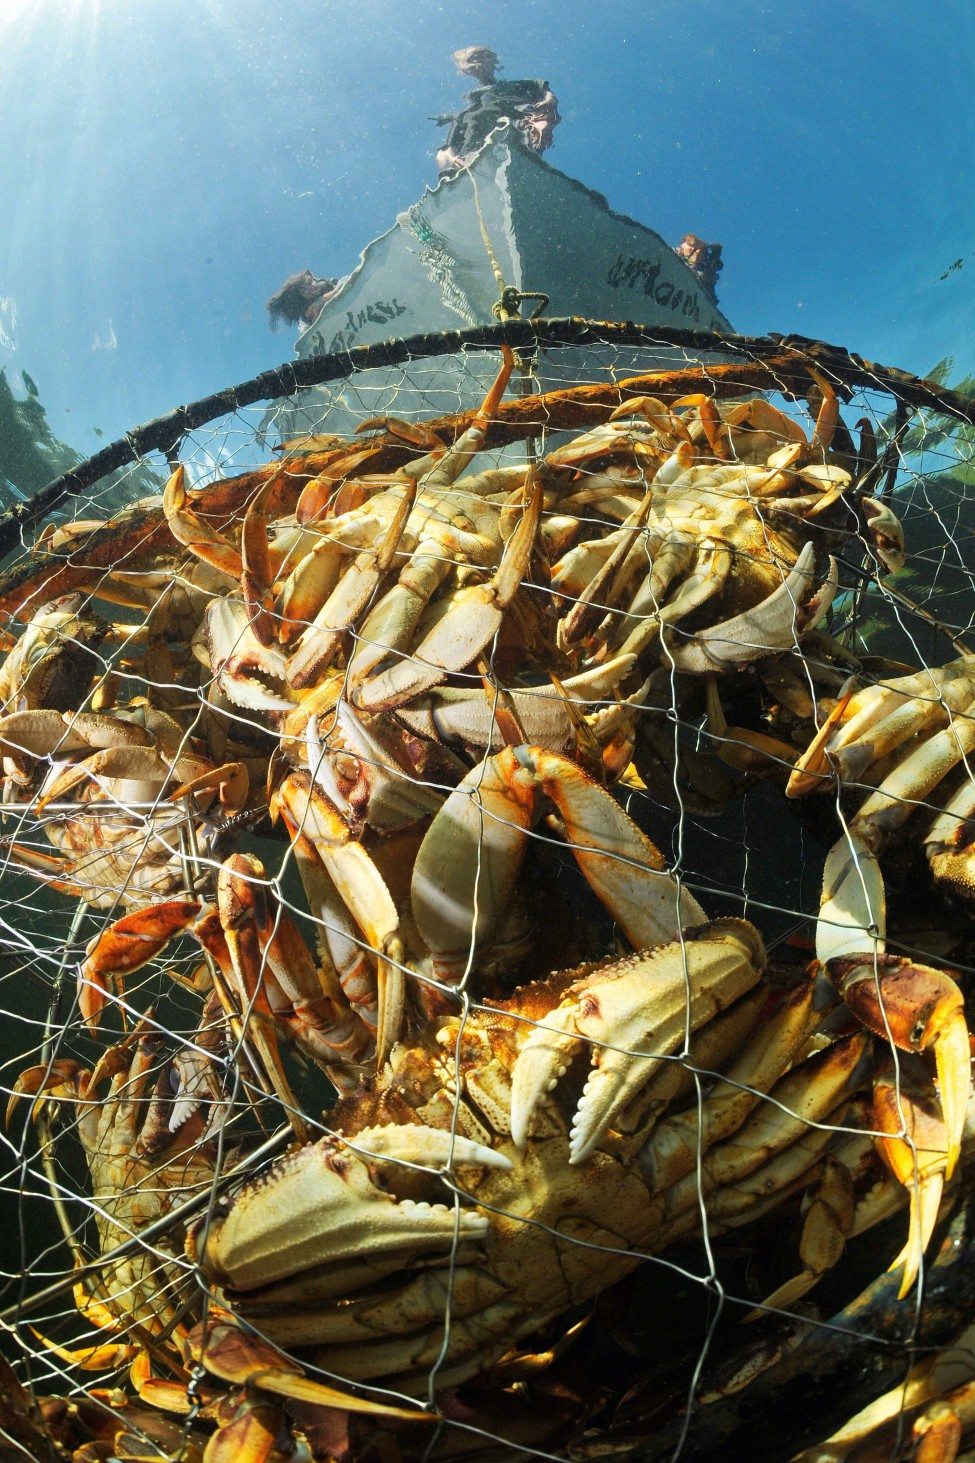 Considered to be the world’s most delicious crustacean, the Dungeness crab is an important food source for the Gitga’at First Nation. Schoolteacher and Hartley Bay councillor Cameron Hill pulls up one of his traps filled with crabs.